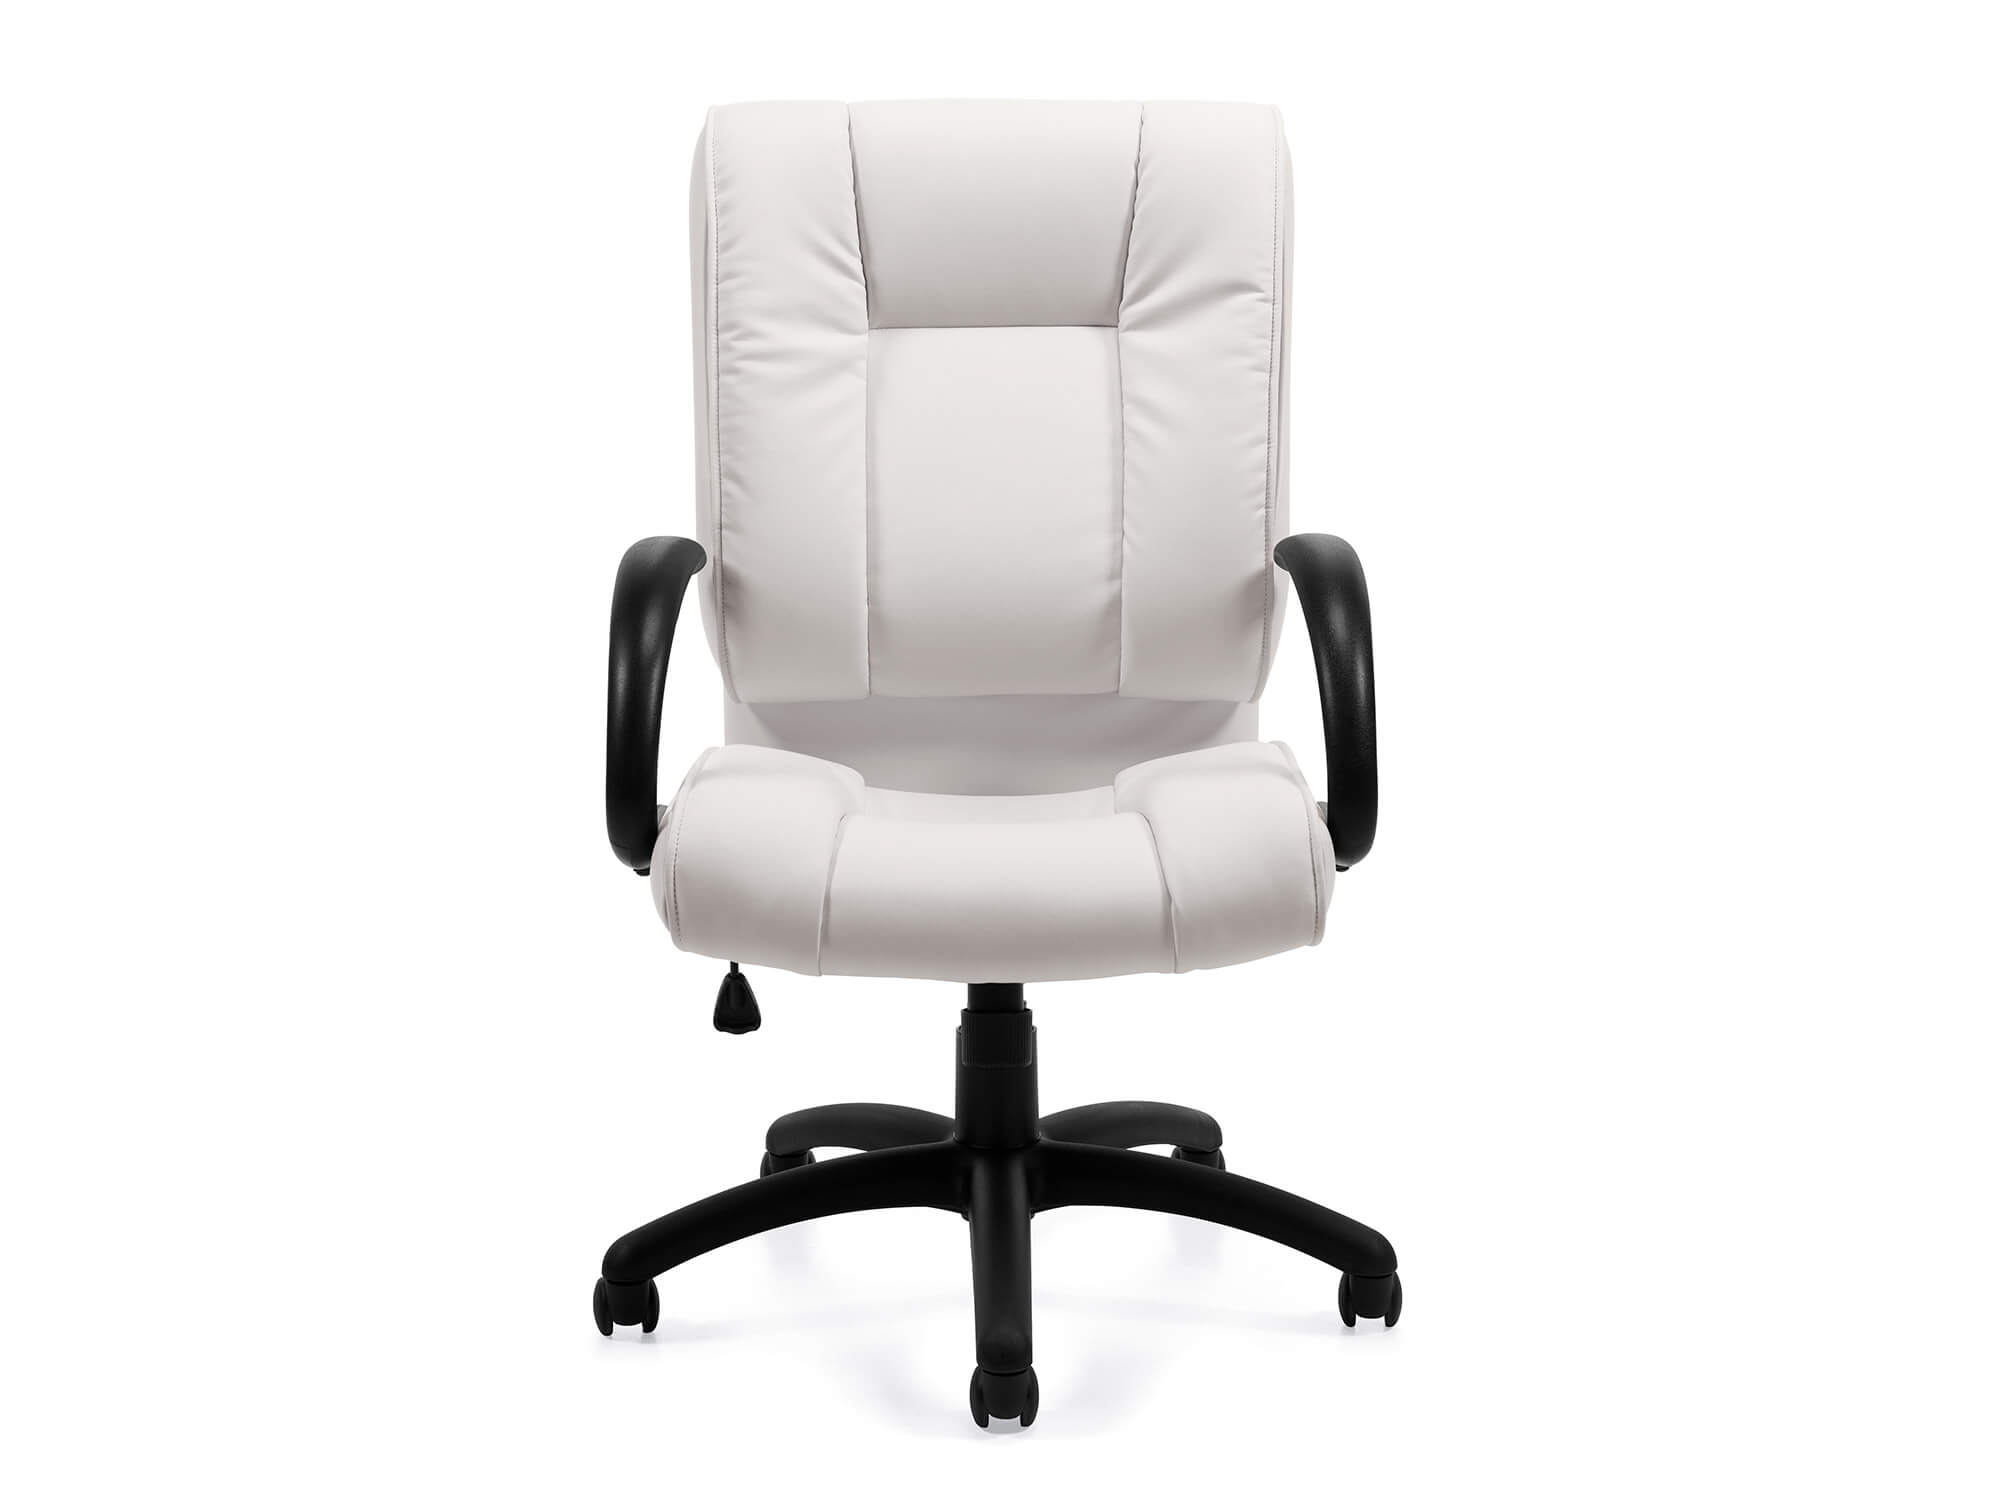 Conference style seating CUB 2700 GTO